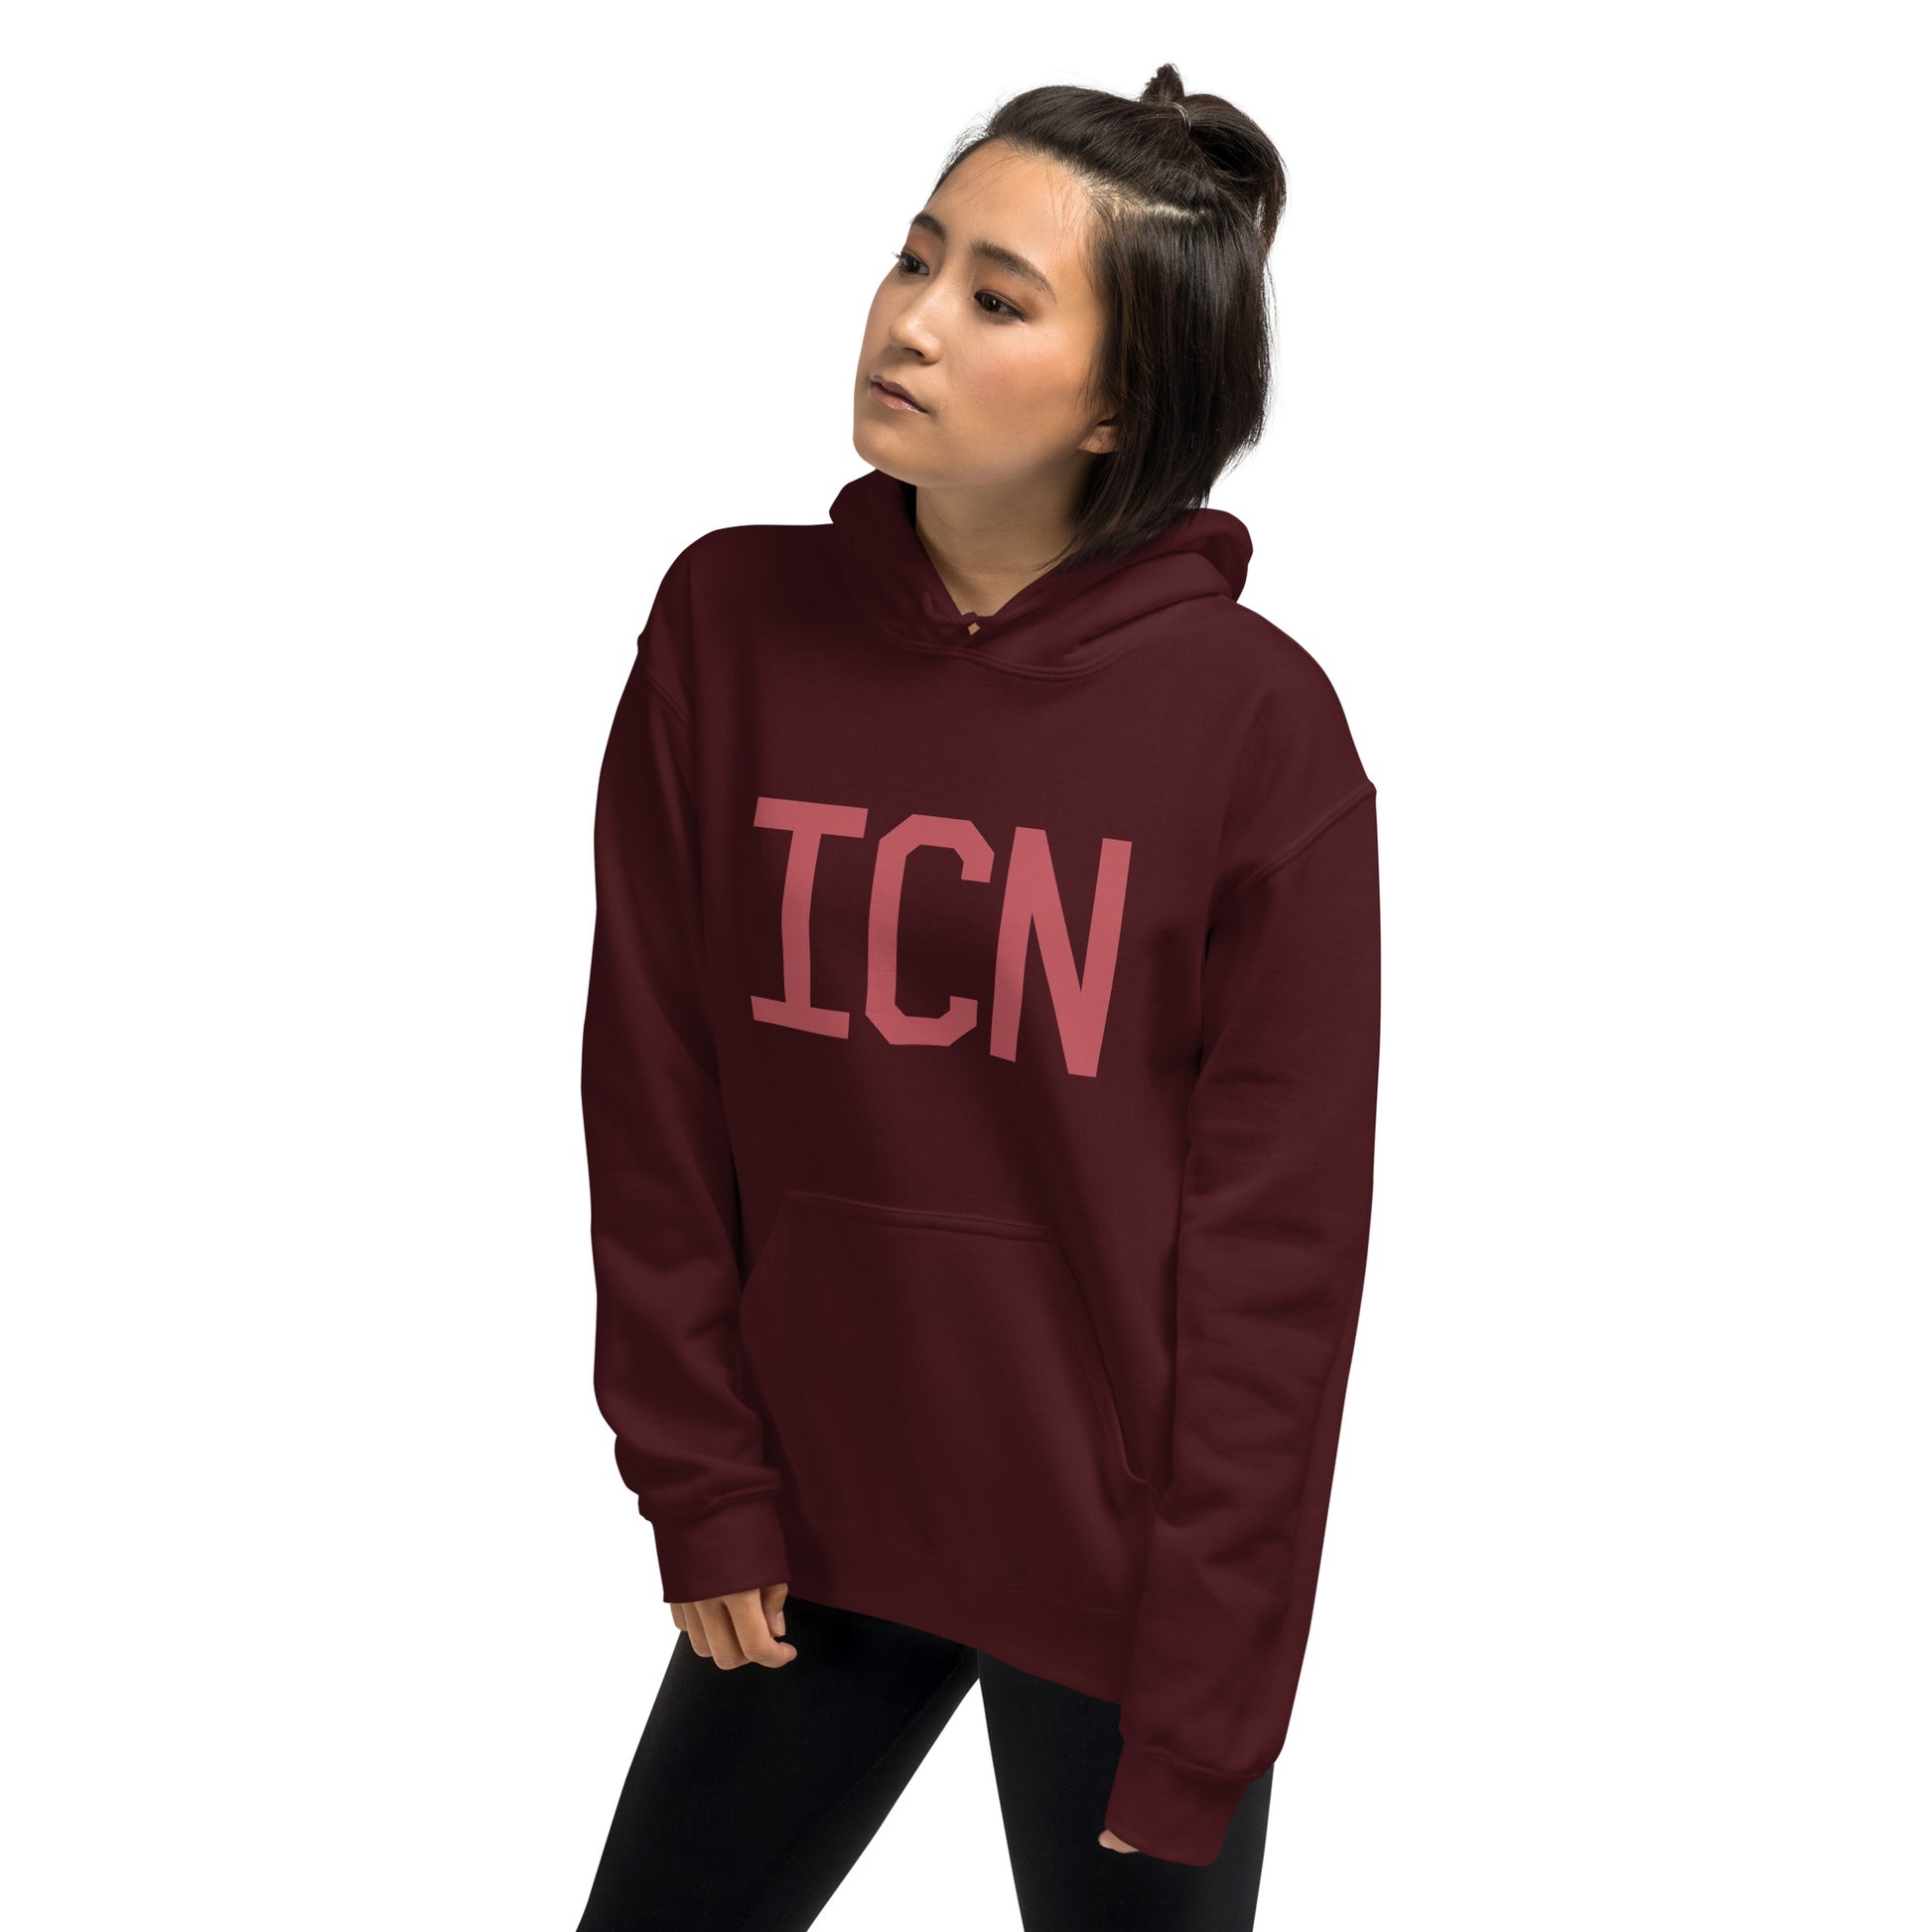 Aviation Enthusiast Hoodie - Deep Pink Graphic • ICN Seoul • YHM Designs - Image 10